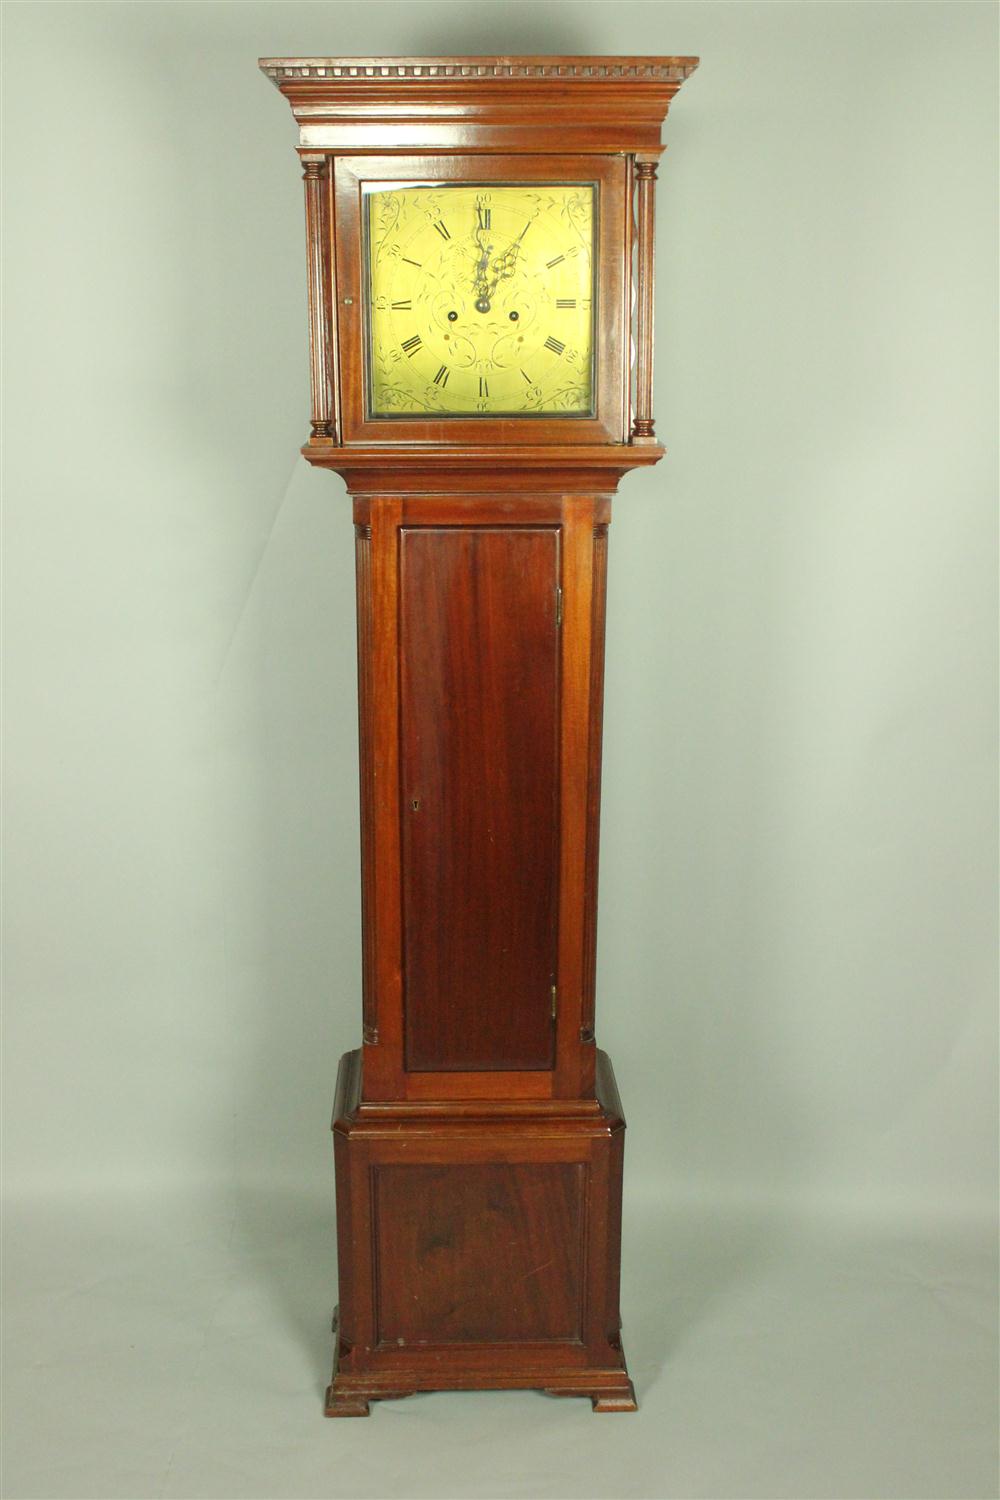 CHIPPENDALE STYLE MAHOGANY TALL